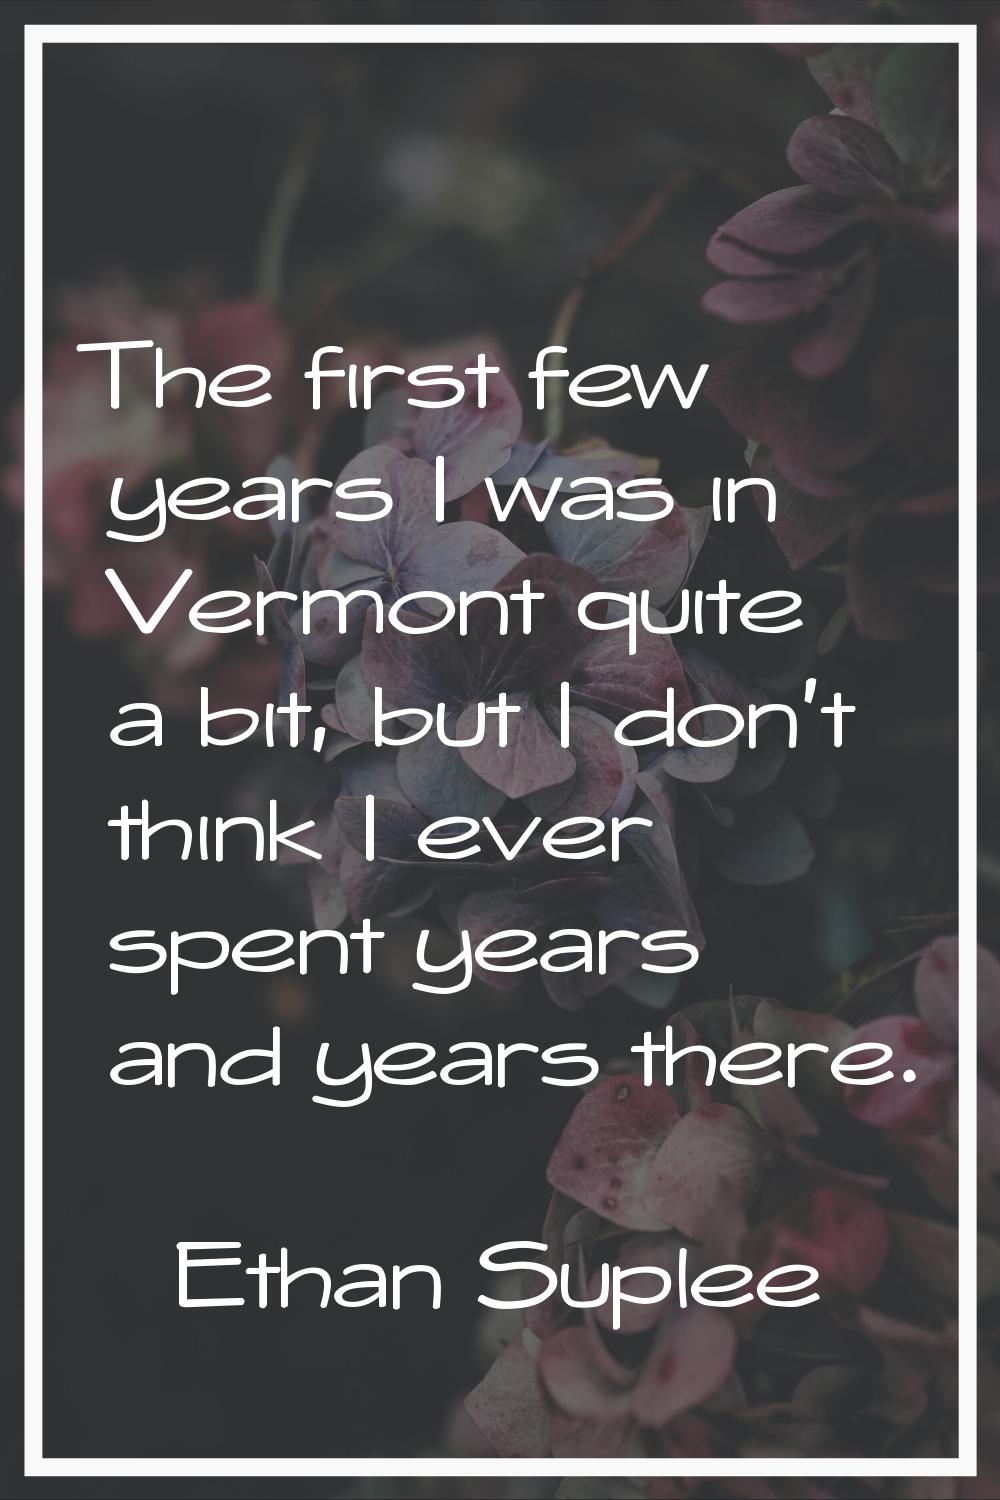 The first few years I was in Vermont quite a bit, but I don't think I ever spent years and years th